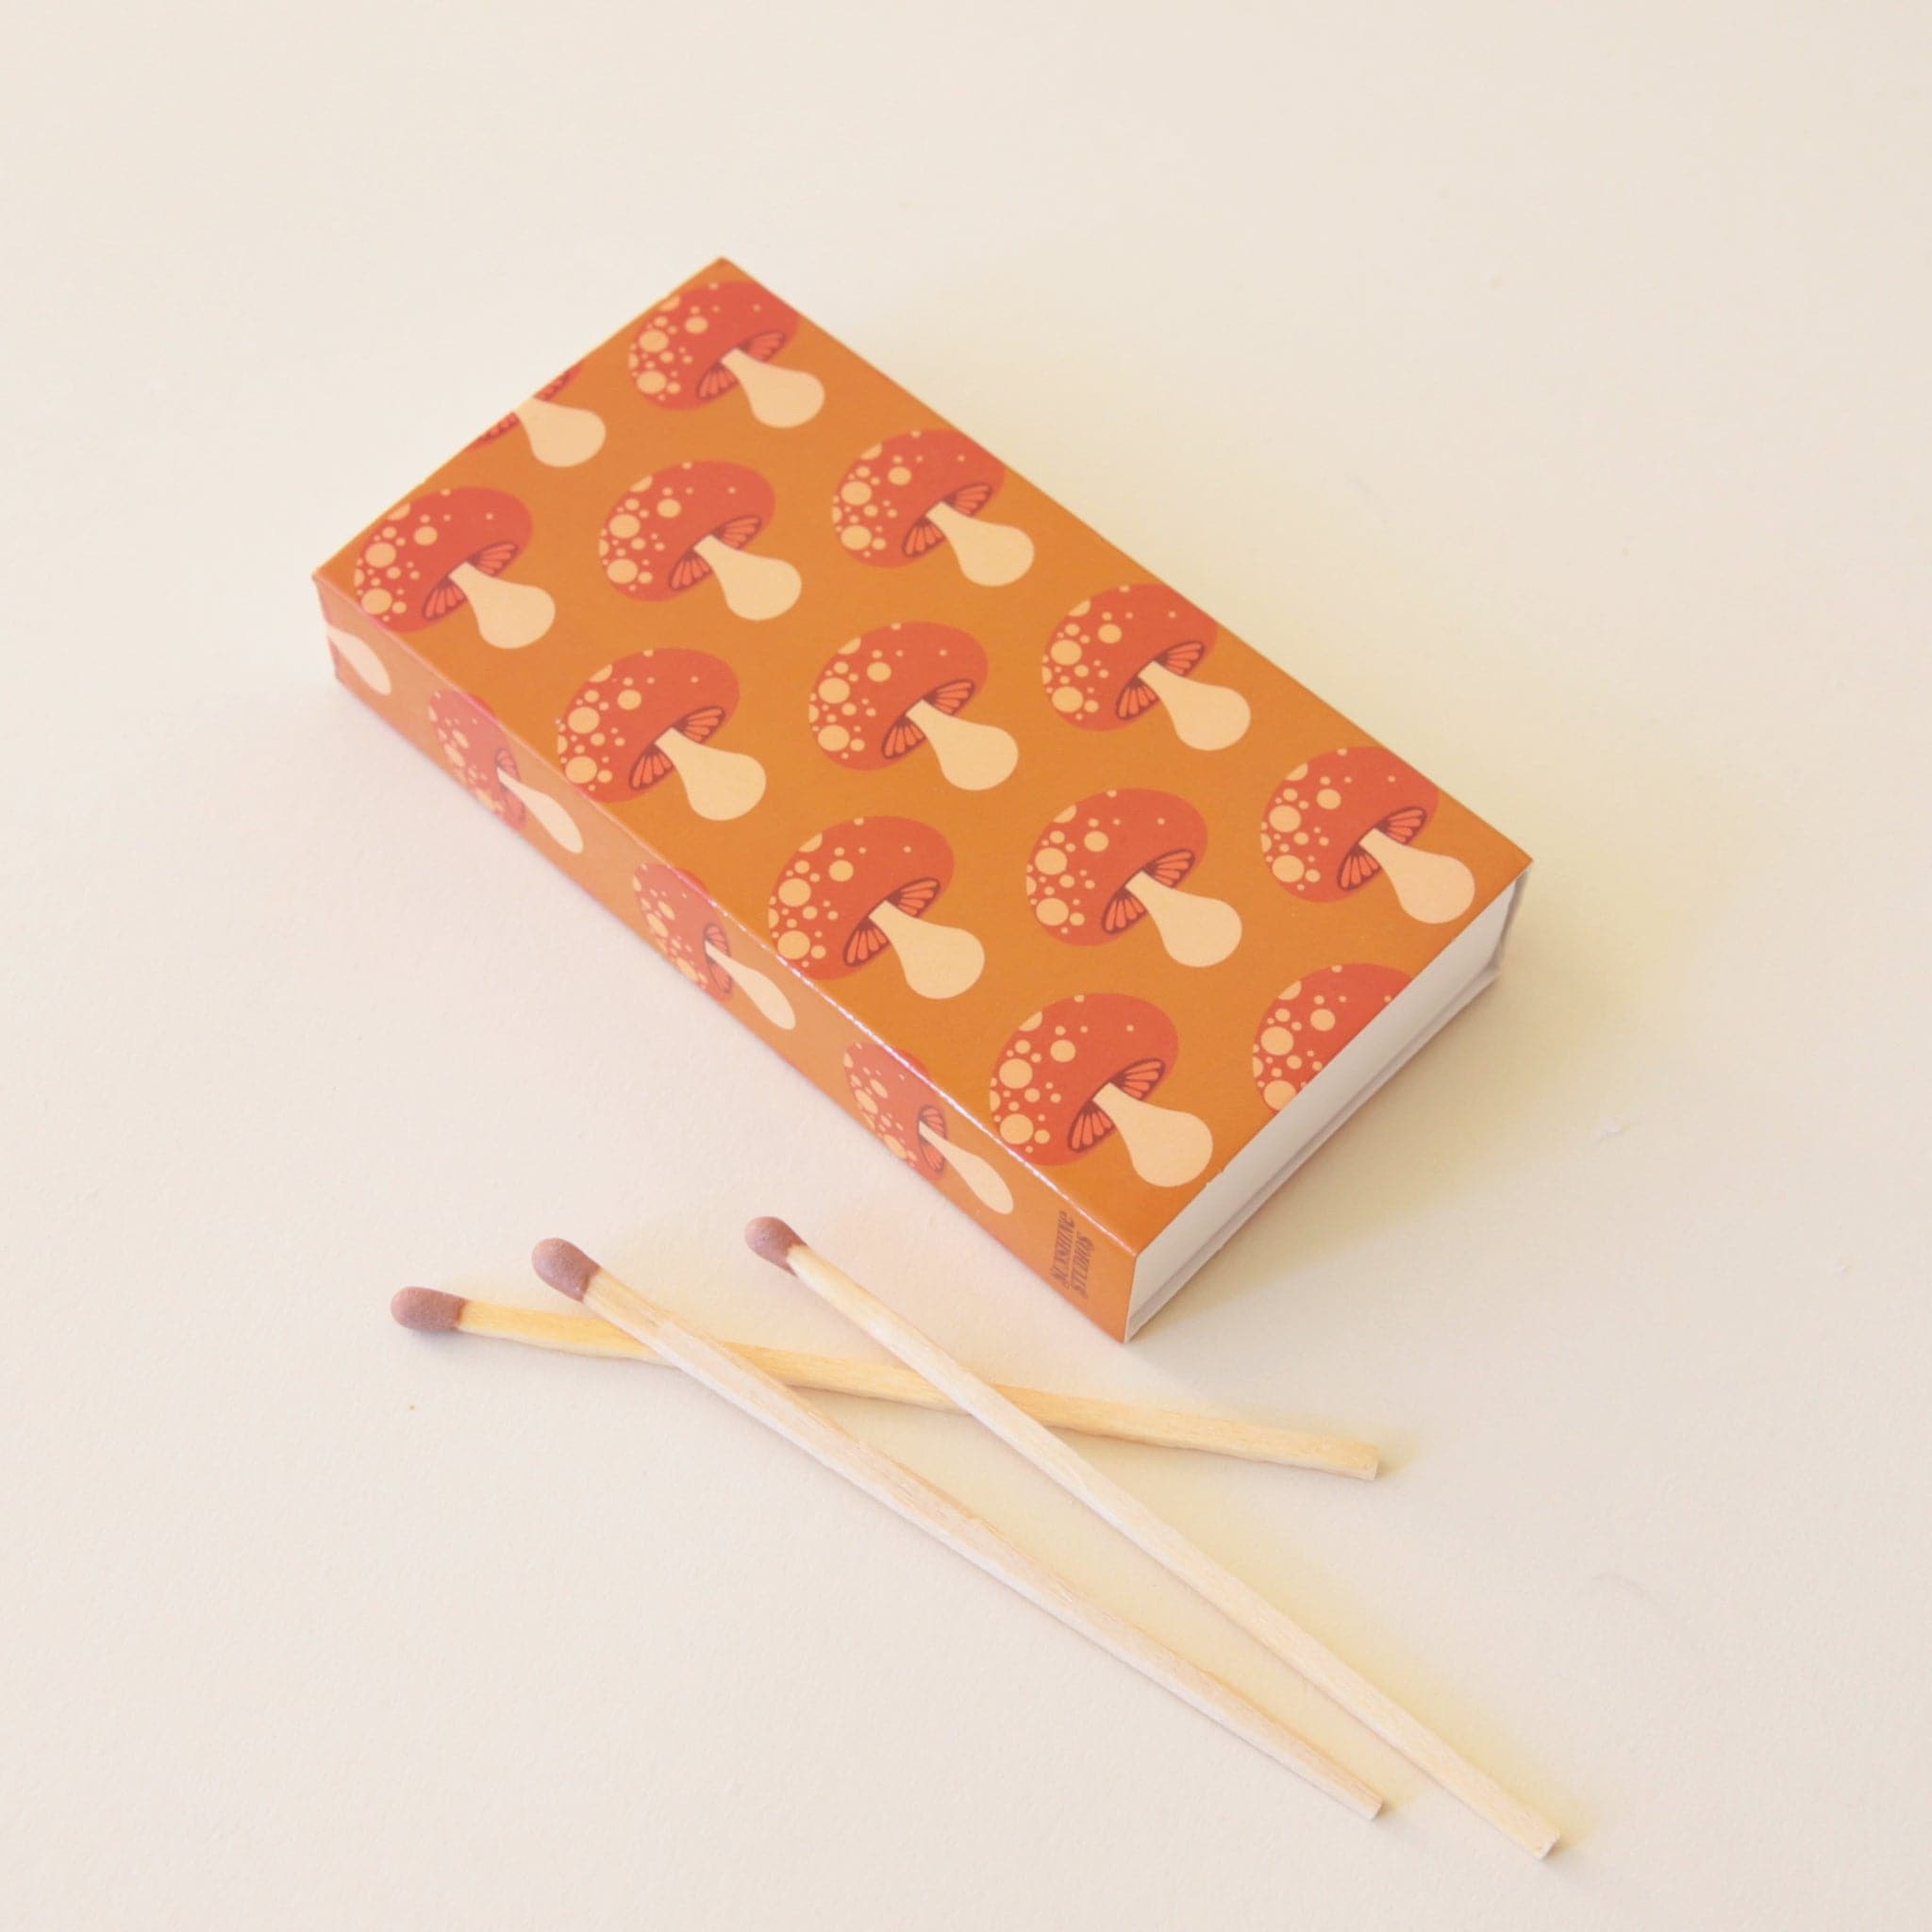 A rectangle box of matches with a repeating red mushroom design along all edges besides the top and bottom. The matches that are inside are also photographed here. They are wooden matches the same length as the box with a red striking tip for lighting.